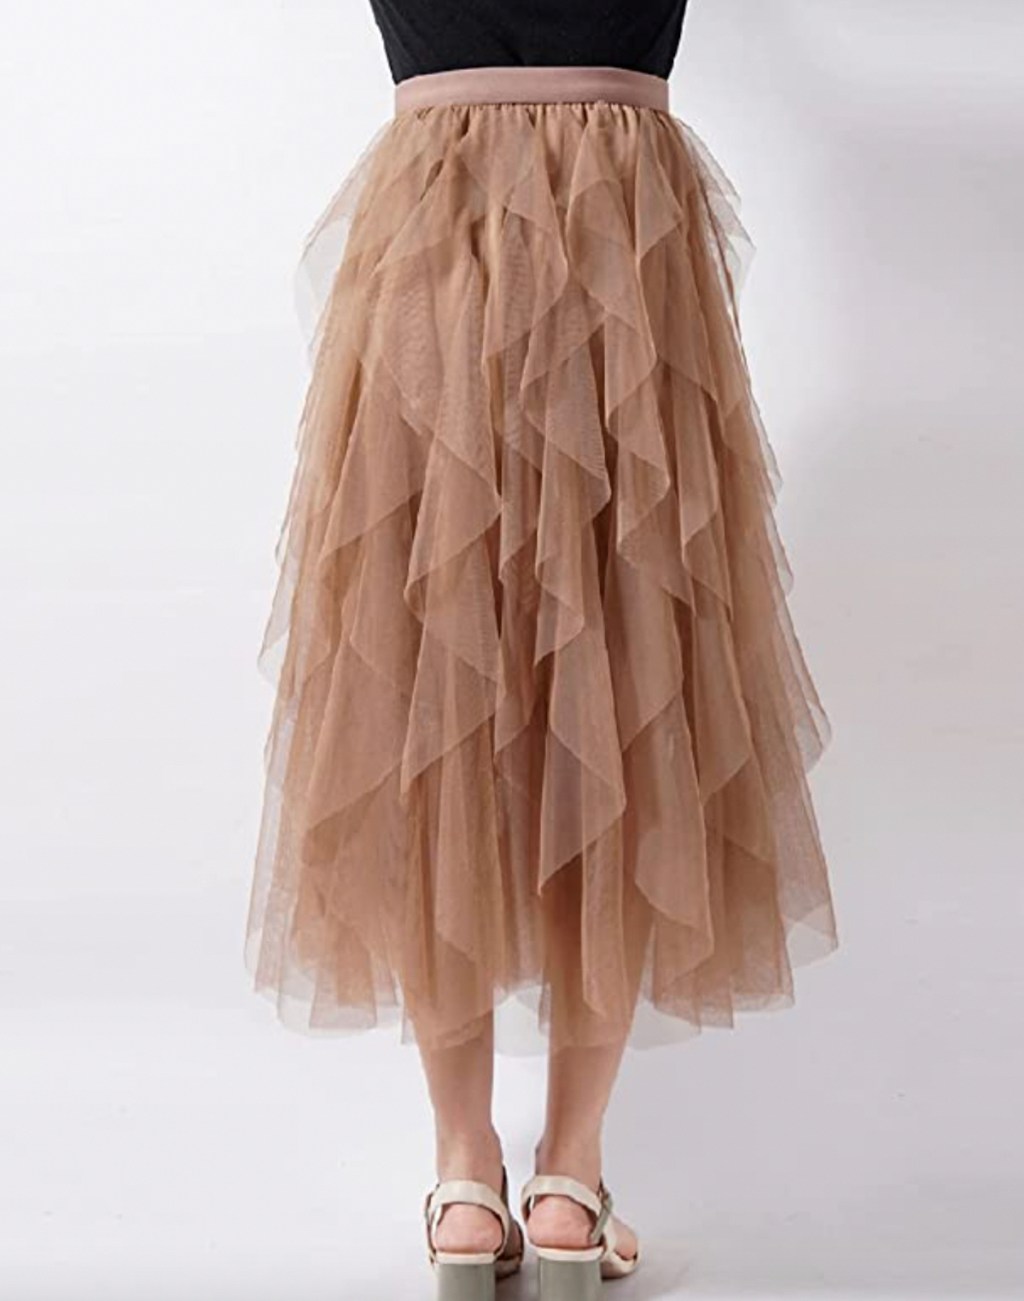 woman wearing blush pink tulle skirt anthropologie clothes